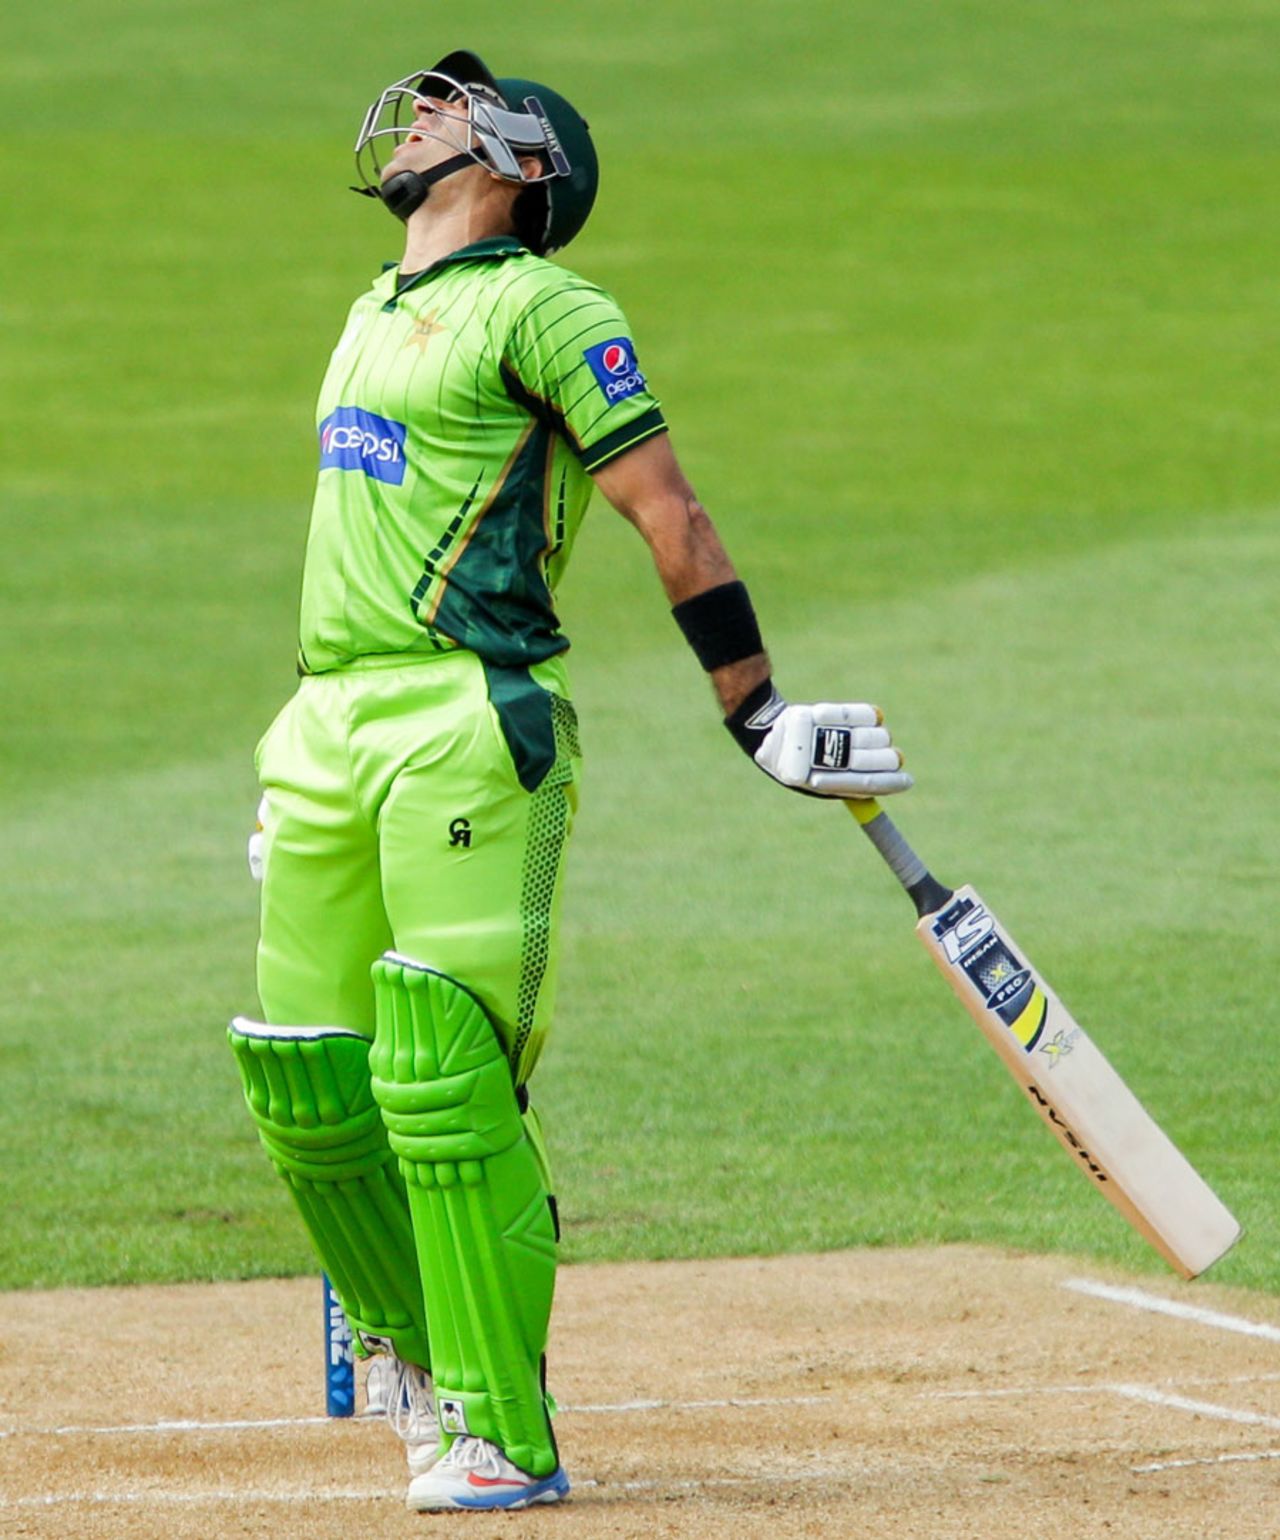 Misbah-ul-Haq is frustrated after throwing away his wicket, New Zealand v Pakistan, 1st ODI, Wellington, January 31, 2015